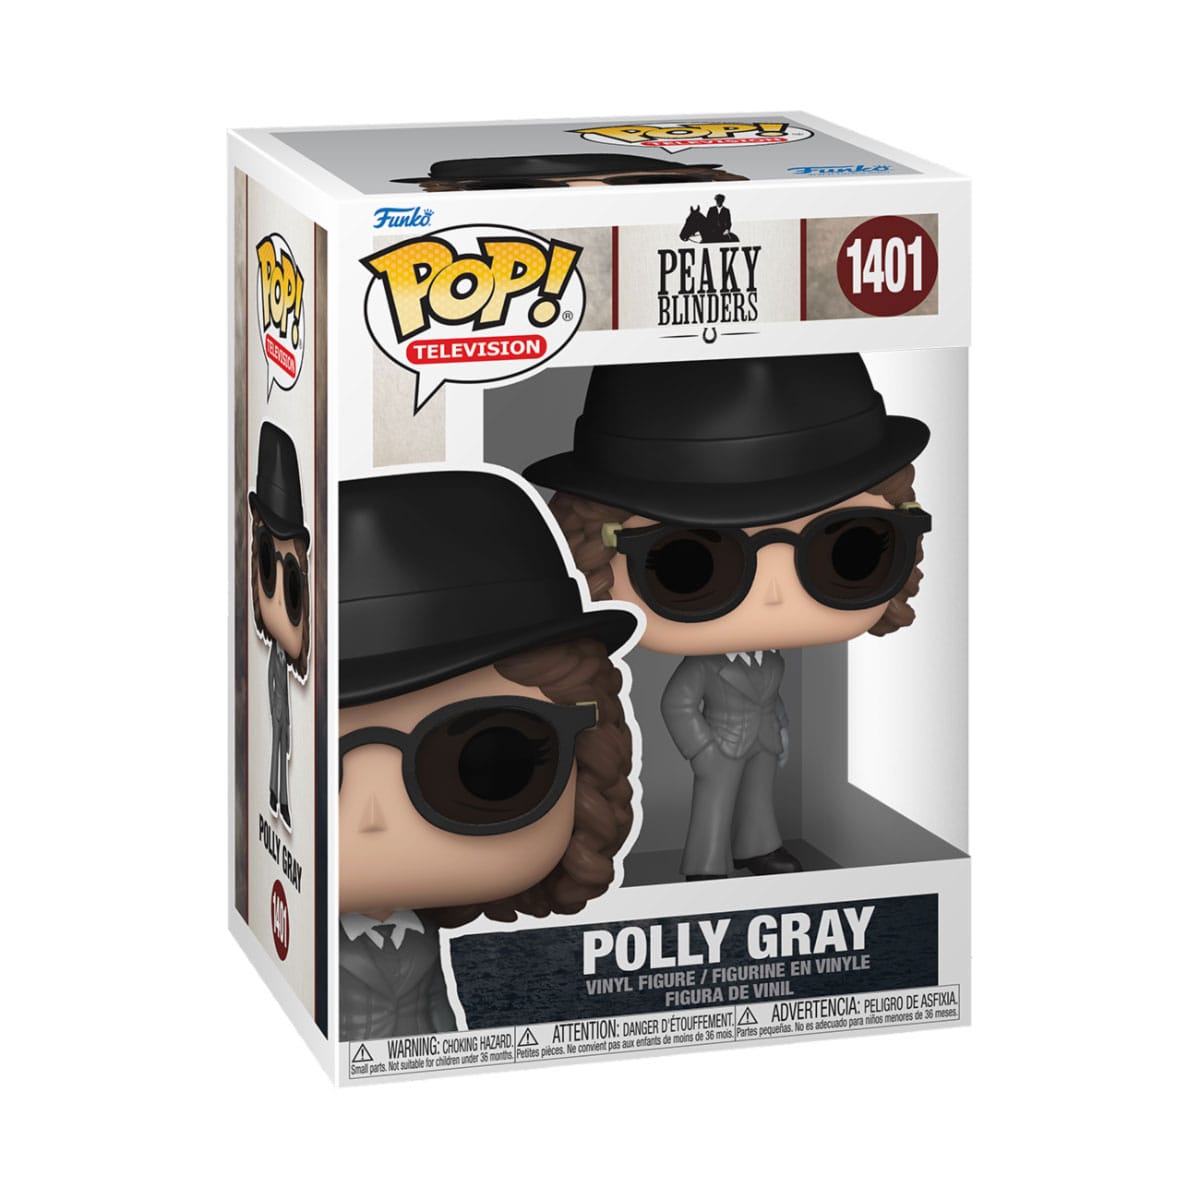 Television - Peaky Blinders - Polly Gray - 1401